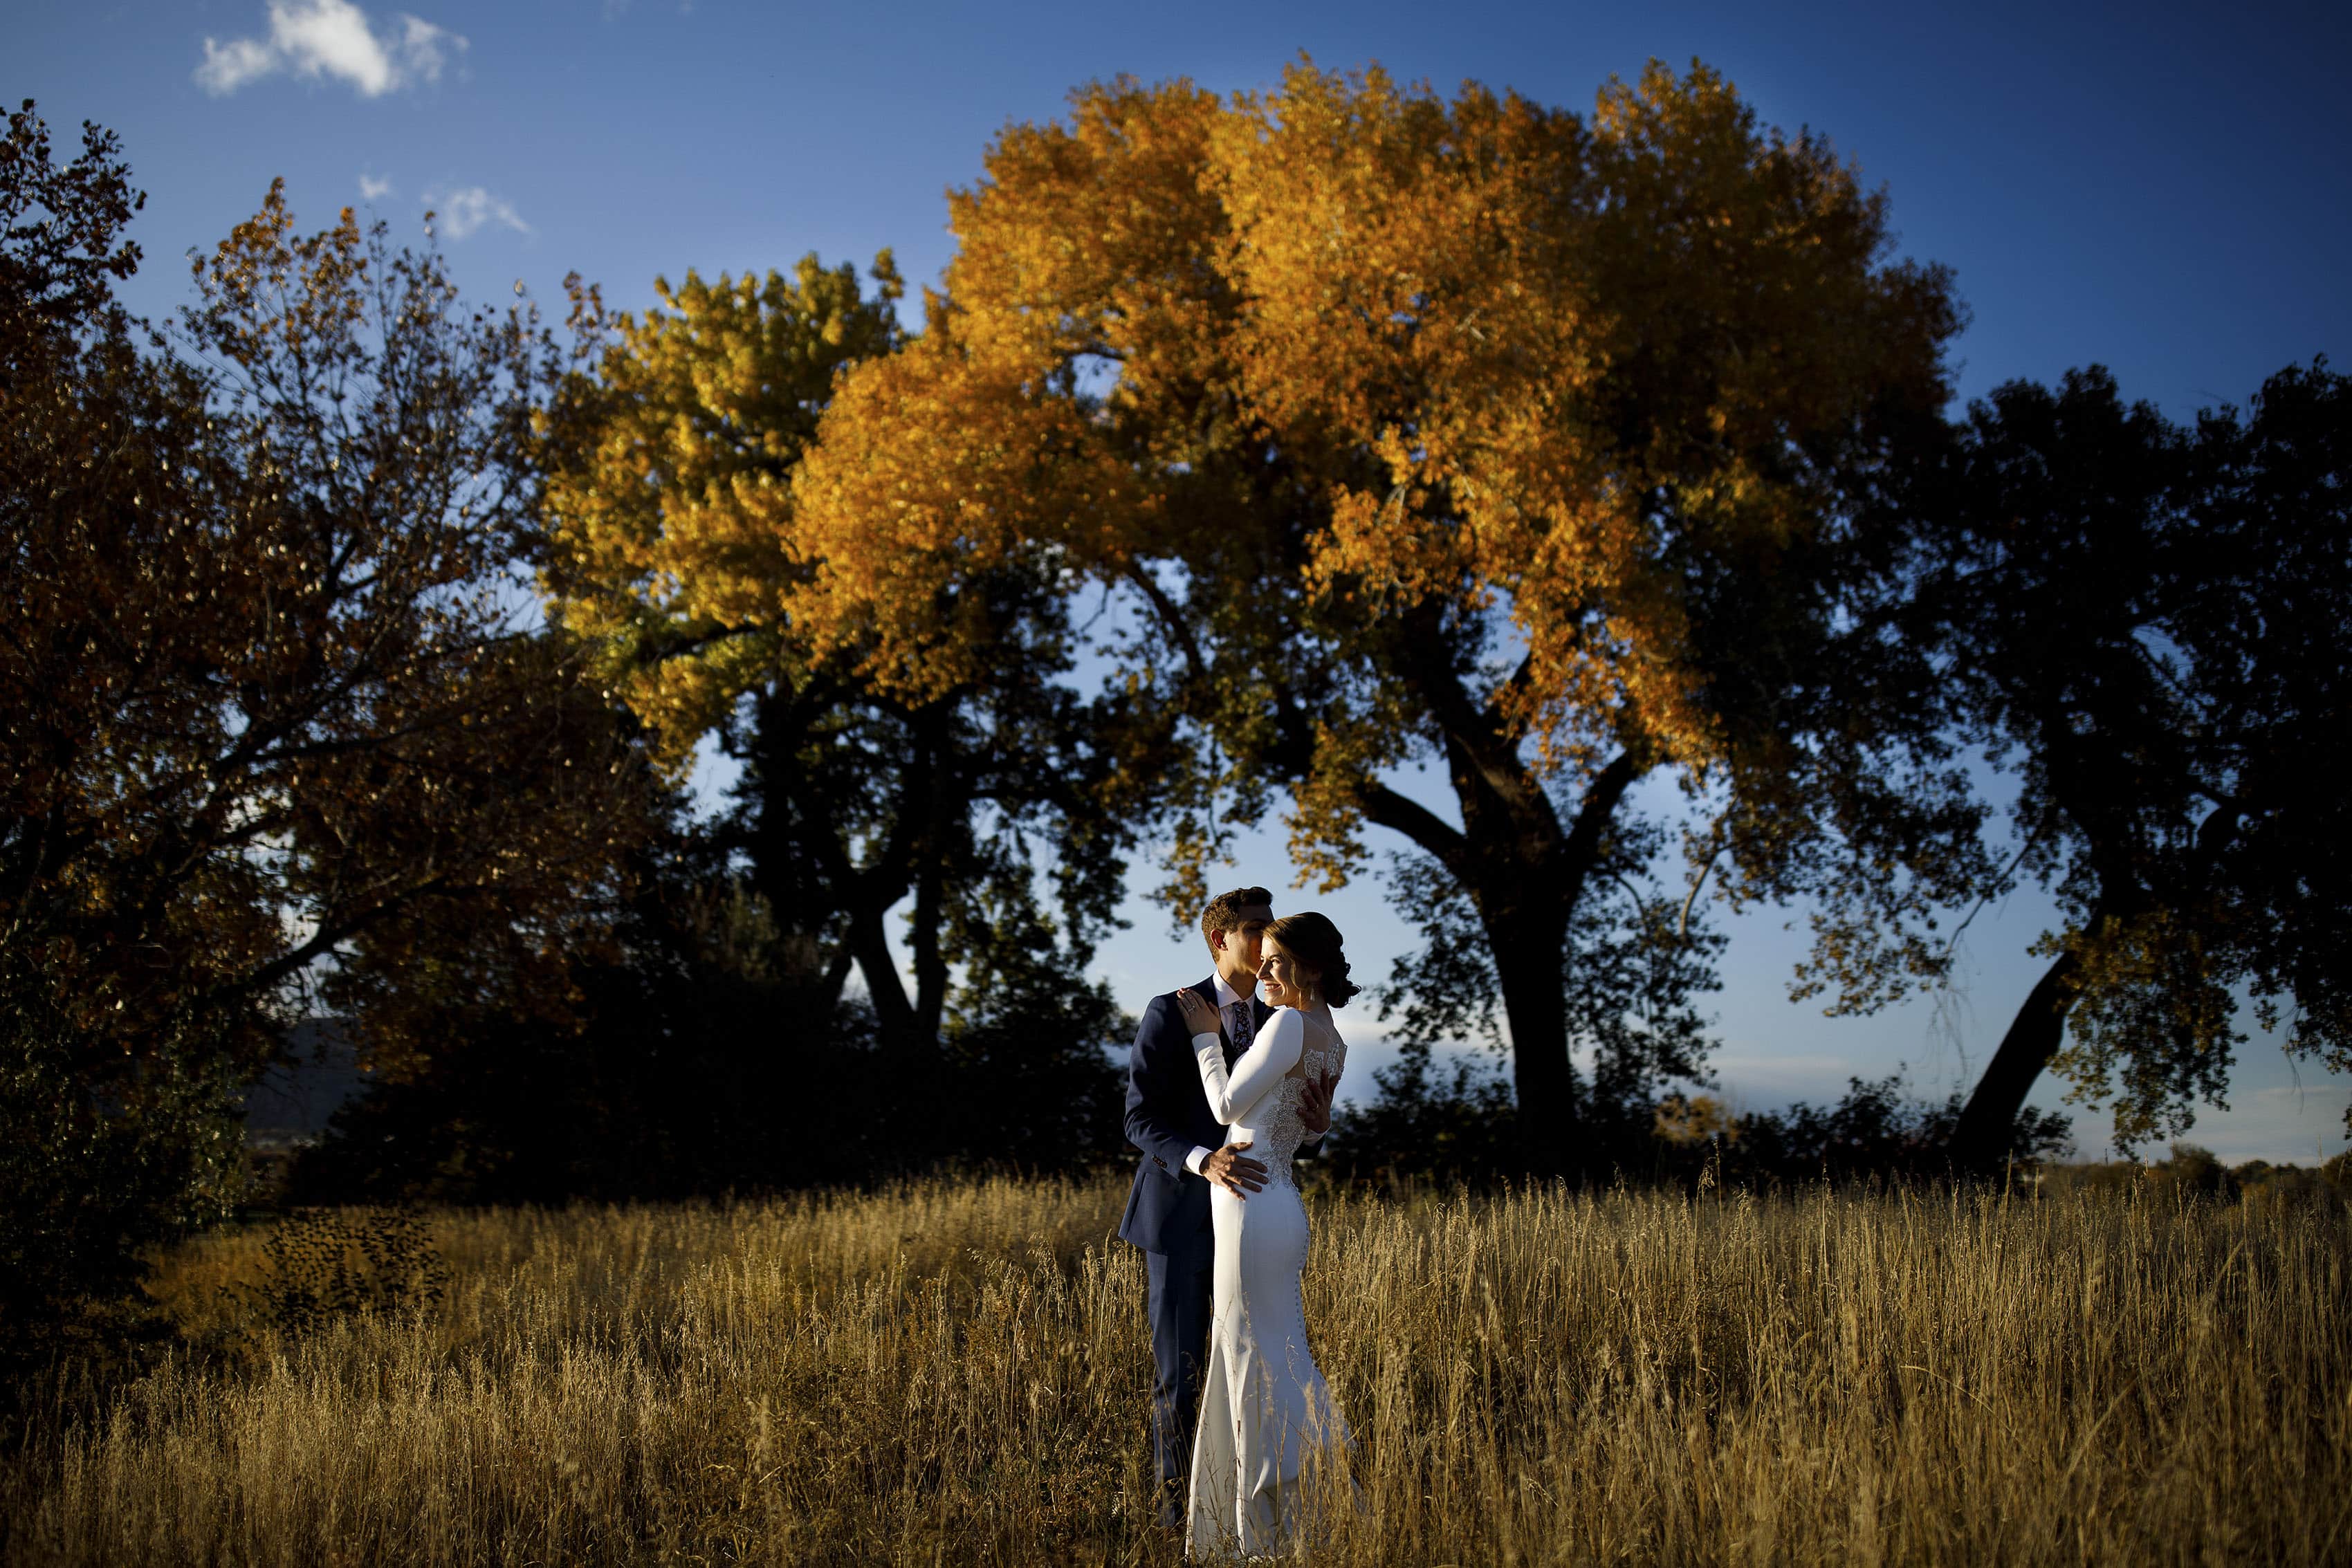 Mike kisses Jessica in a field near a colorful tree during their The Vista at Applewood Golf Course wedding day